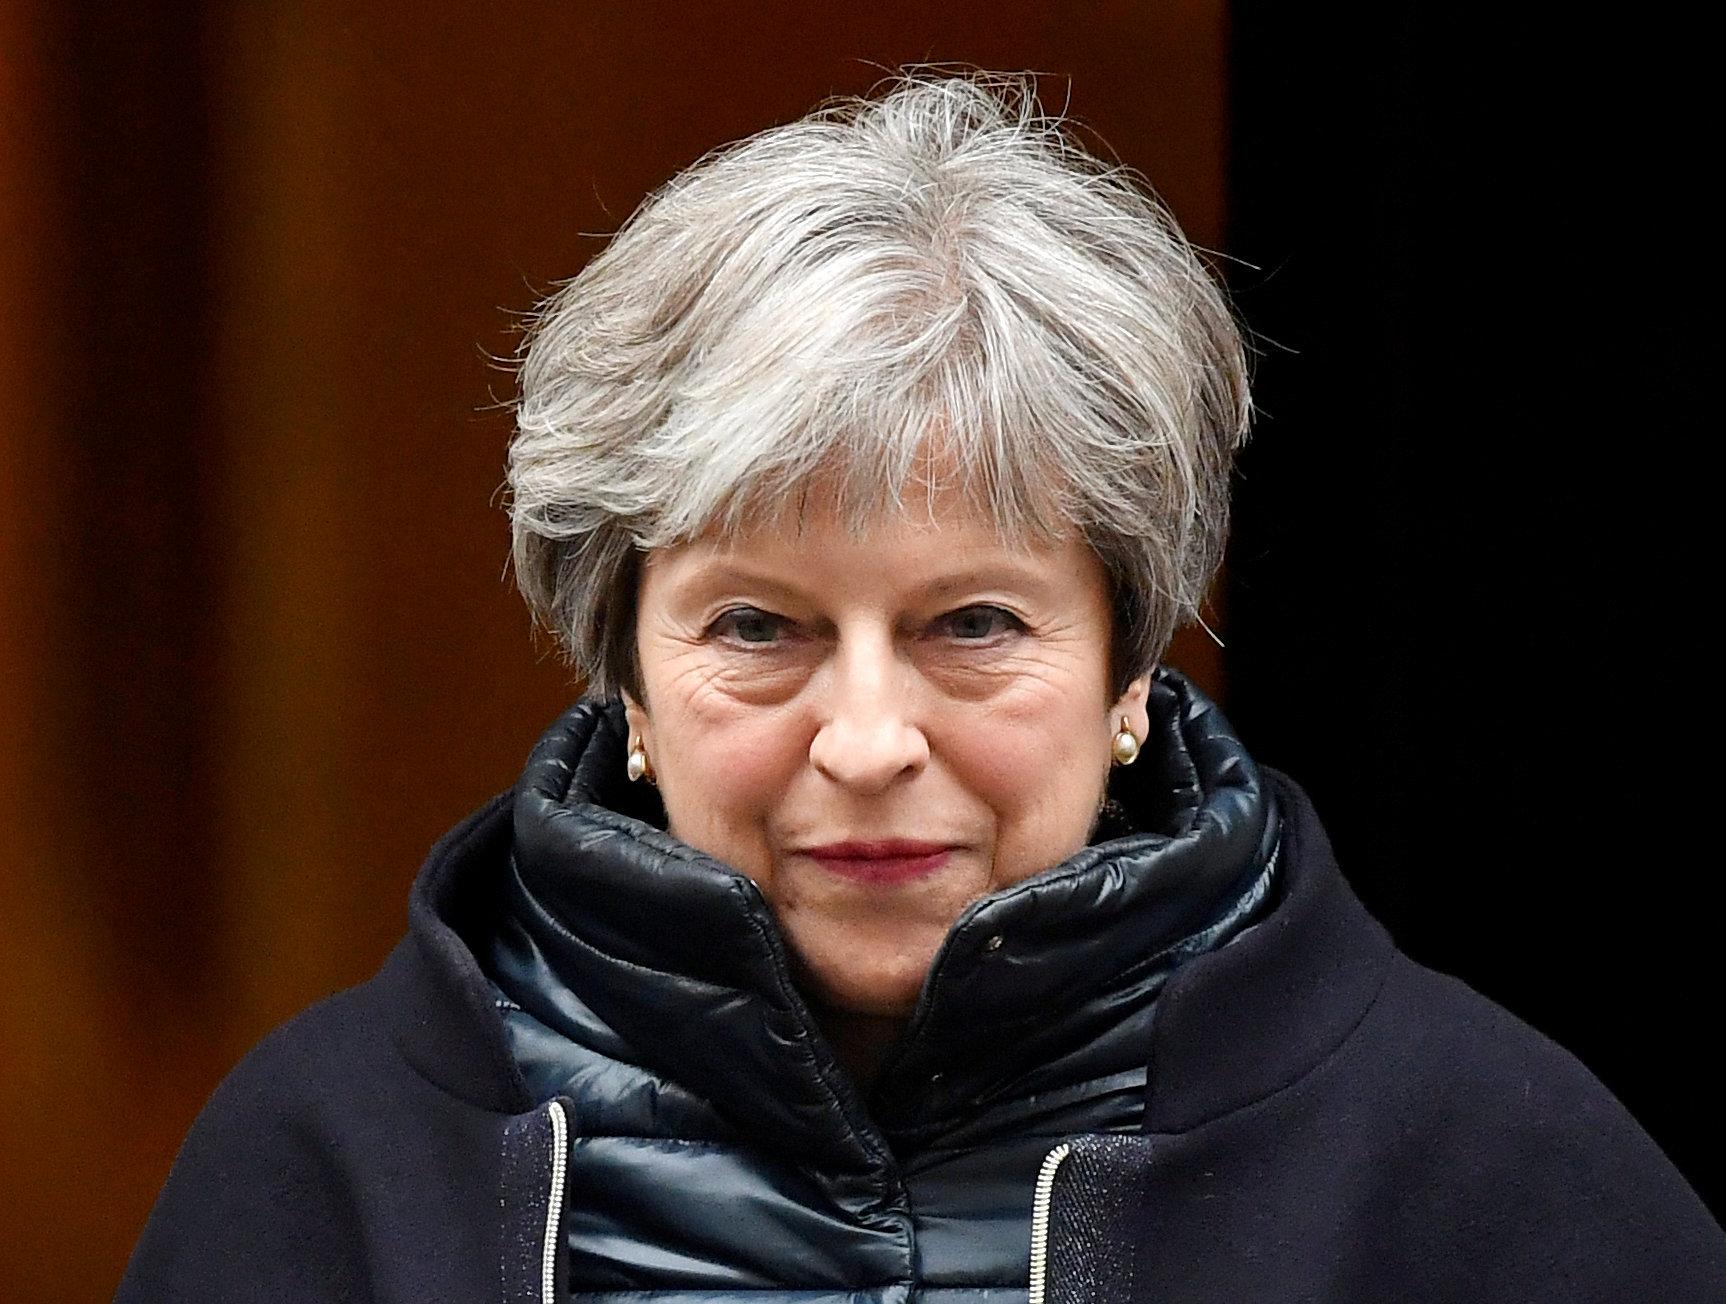 Theresa May has sought to quell discontent among Tory backbenches who fear she is pursuing a soft Brexit